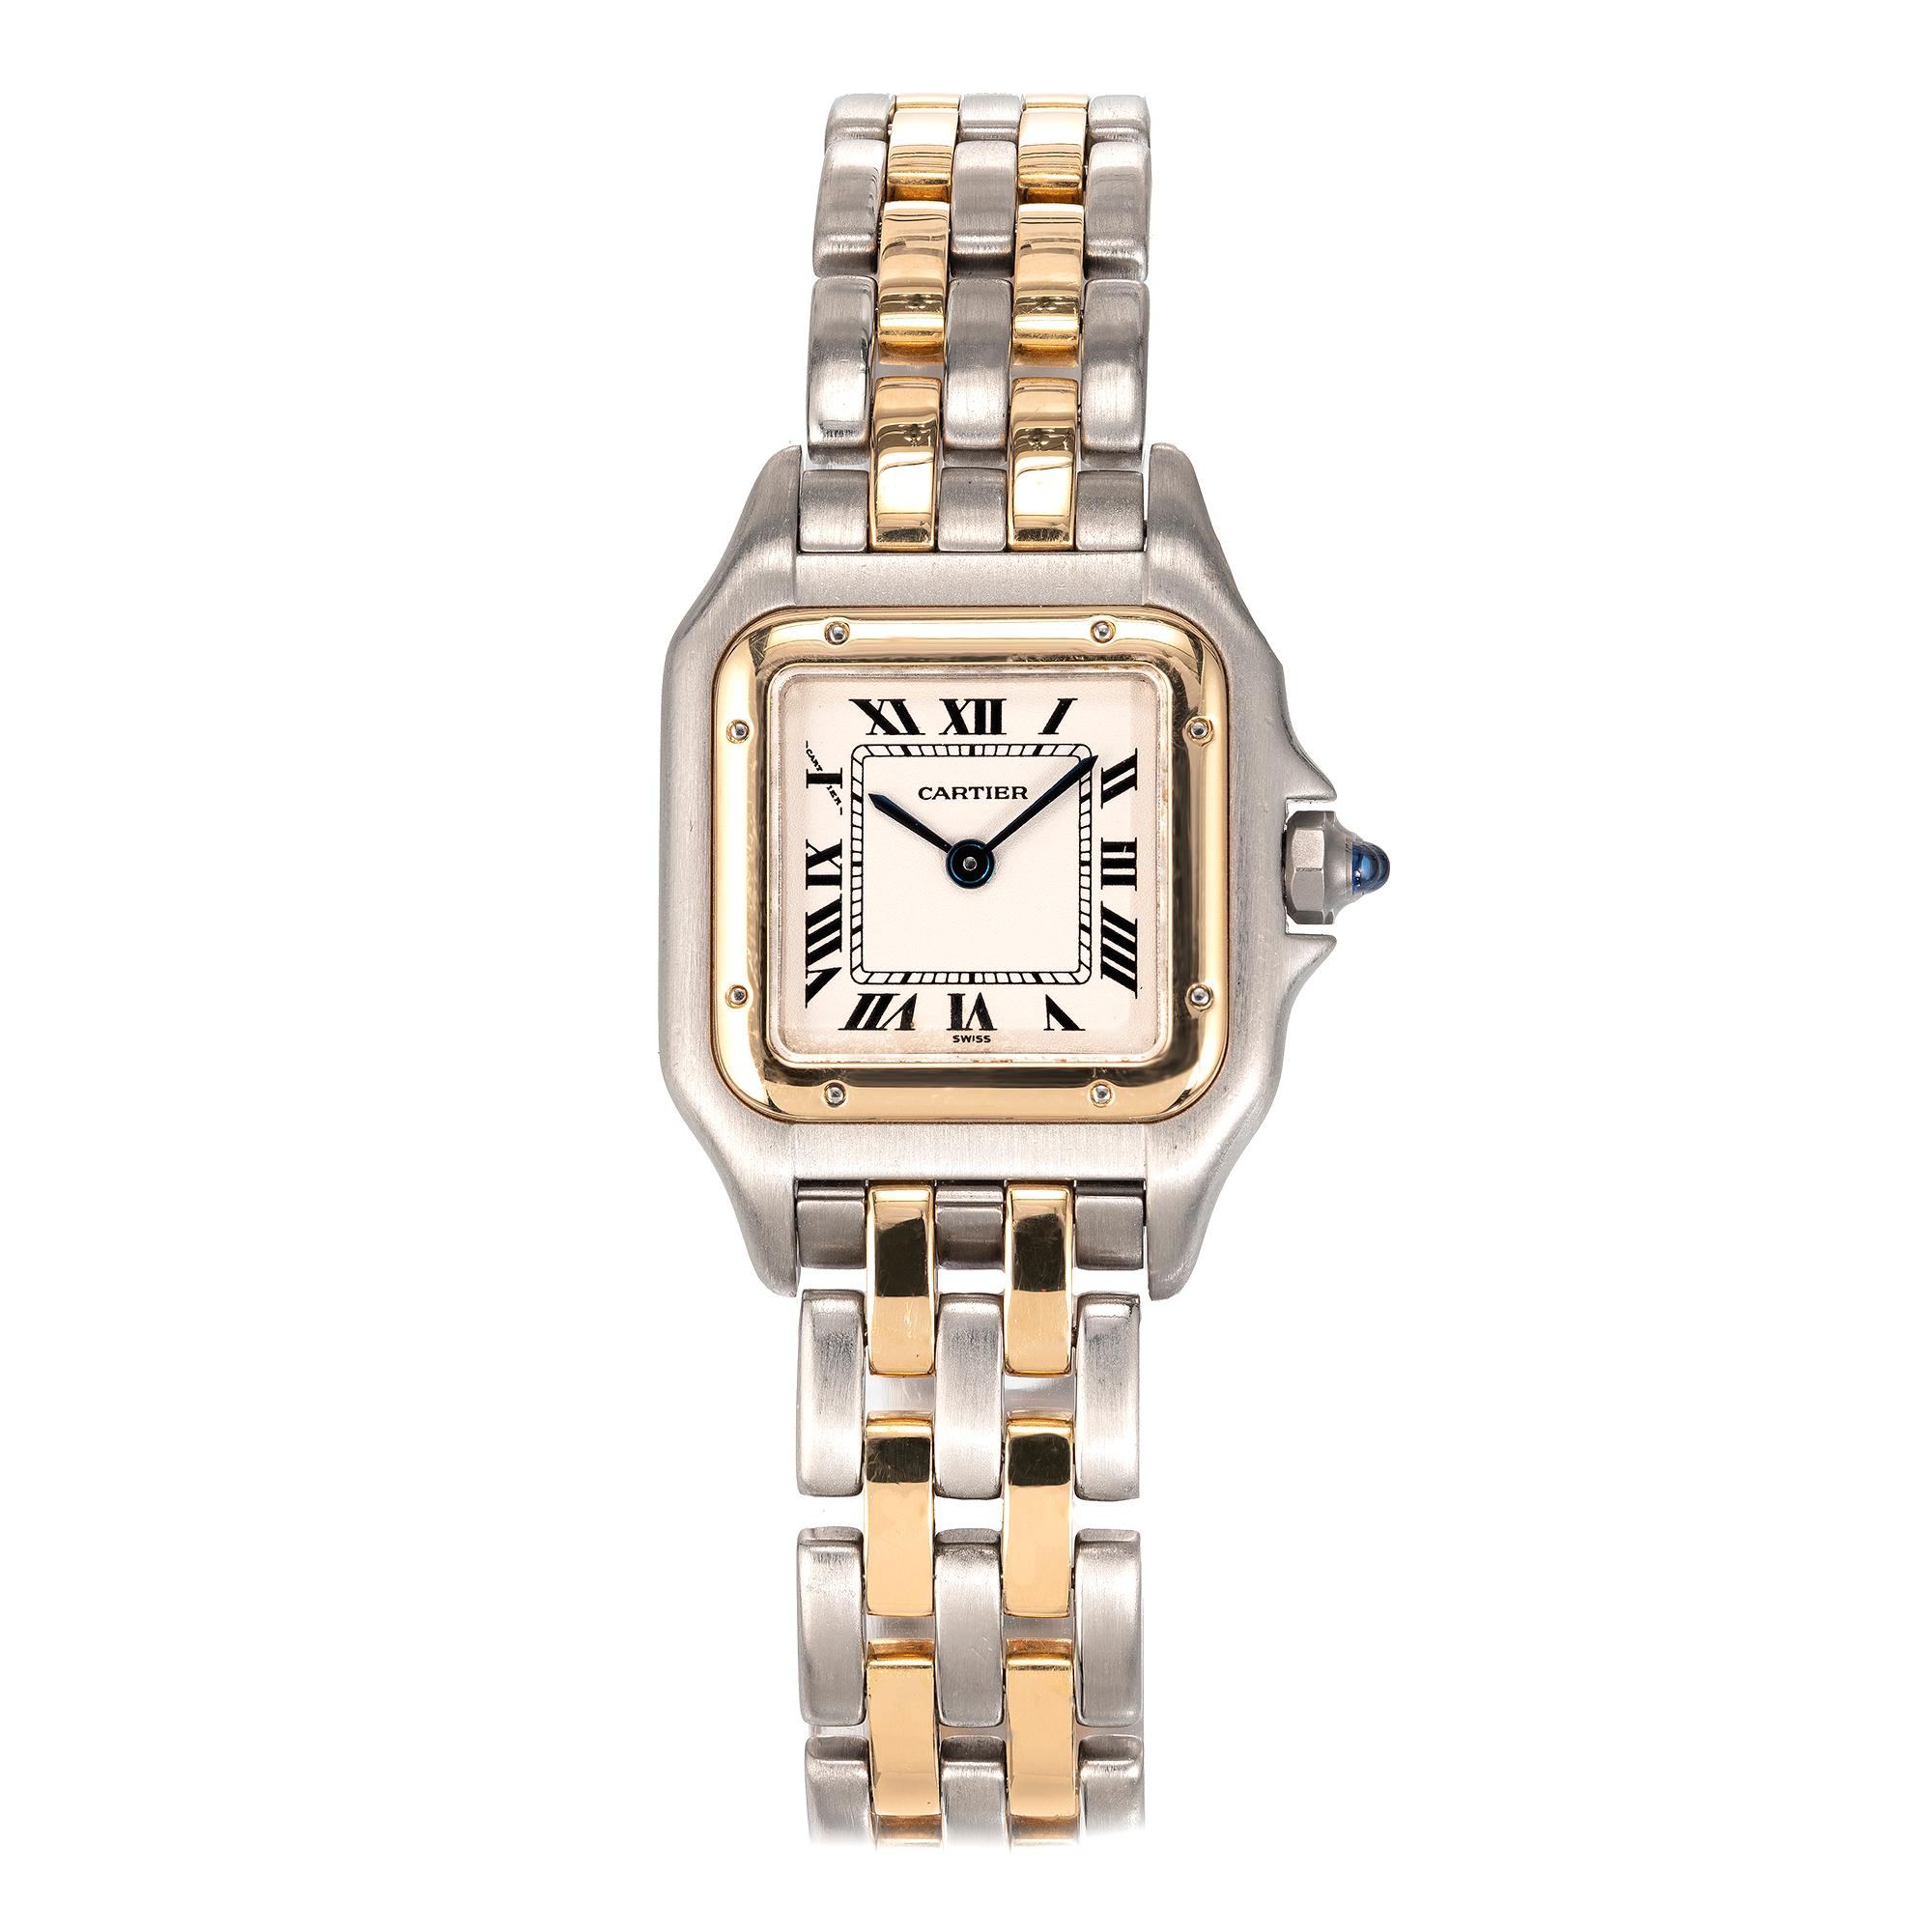 Ladies Cartier Panthere 18k gold and steel two row quartz wristwatch with gold and steel tone Cartier band.

Length: 29mm
Width: 22mm
Band width at case: 12mm
Case Thickness: 5.25mm
Dial: Cartier factory off white 
Outside case: Cartier Quartz